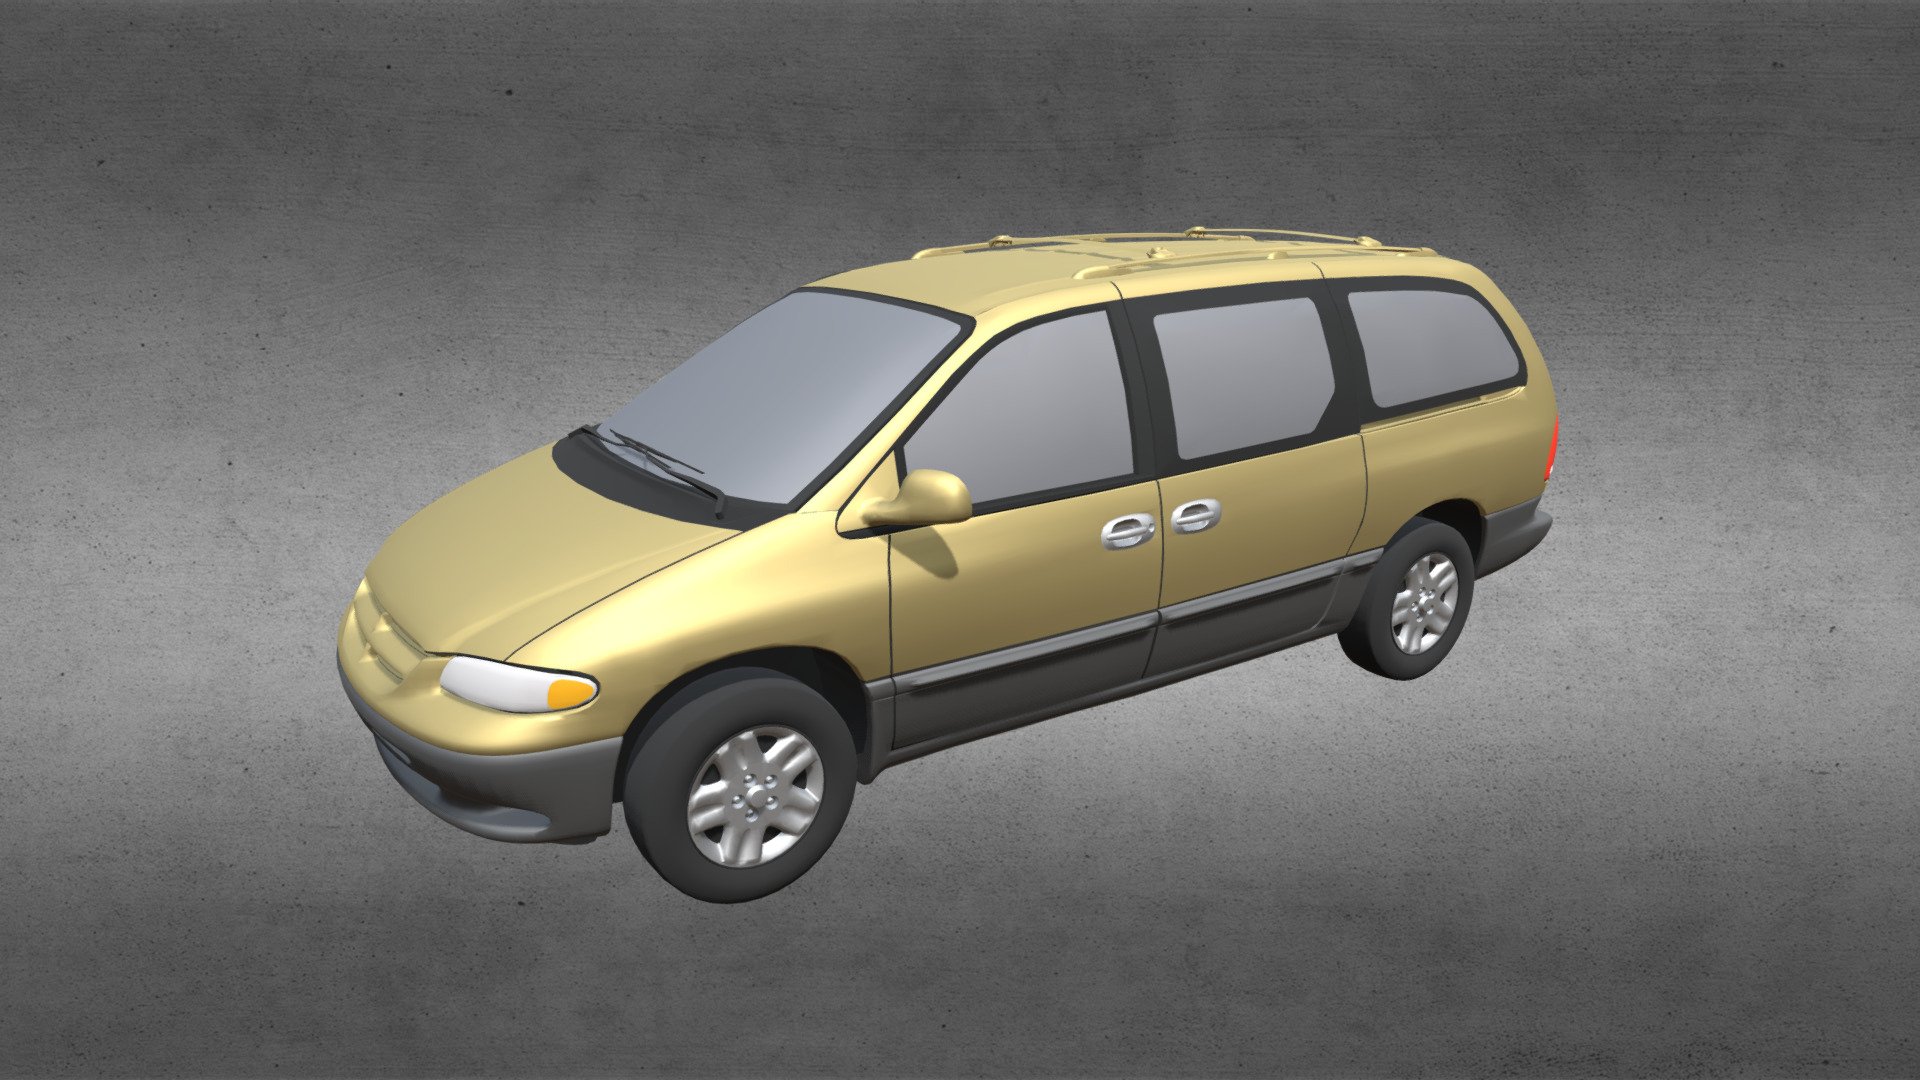 The Dodge Caravan is a family minivan manufactured by Chrysler Group LLC and sold under its Dodge brand.

This digital model is based on the 1996 version of the Dodge Caravan.

Product Features:
- Made entirely with 3 and 4 point polygons.
- Does not have an interior cabin, so we recommend darkening the windows.
- Because of this, the doors are not separate parts.
- Includes group information for all 4 wheels
- Although the model includes these parts, this version of the model is not rigged.
- Includes logically named materials, which makes it very easy to recolor the model.
- The model has basic UV mapping and NO textures are included. You'll need to apply your own shaders, such as metal and fabric.

Original model by Digimation and sold here with permission 3d model